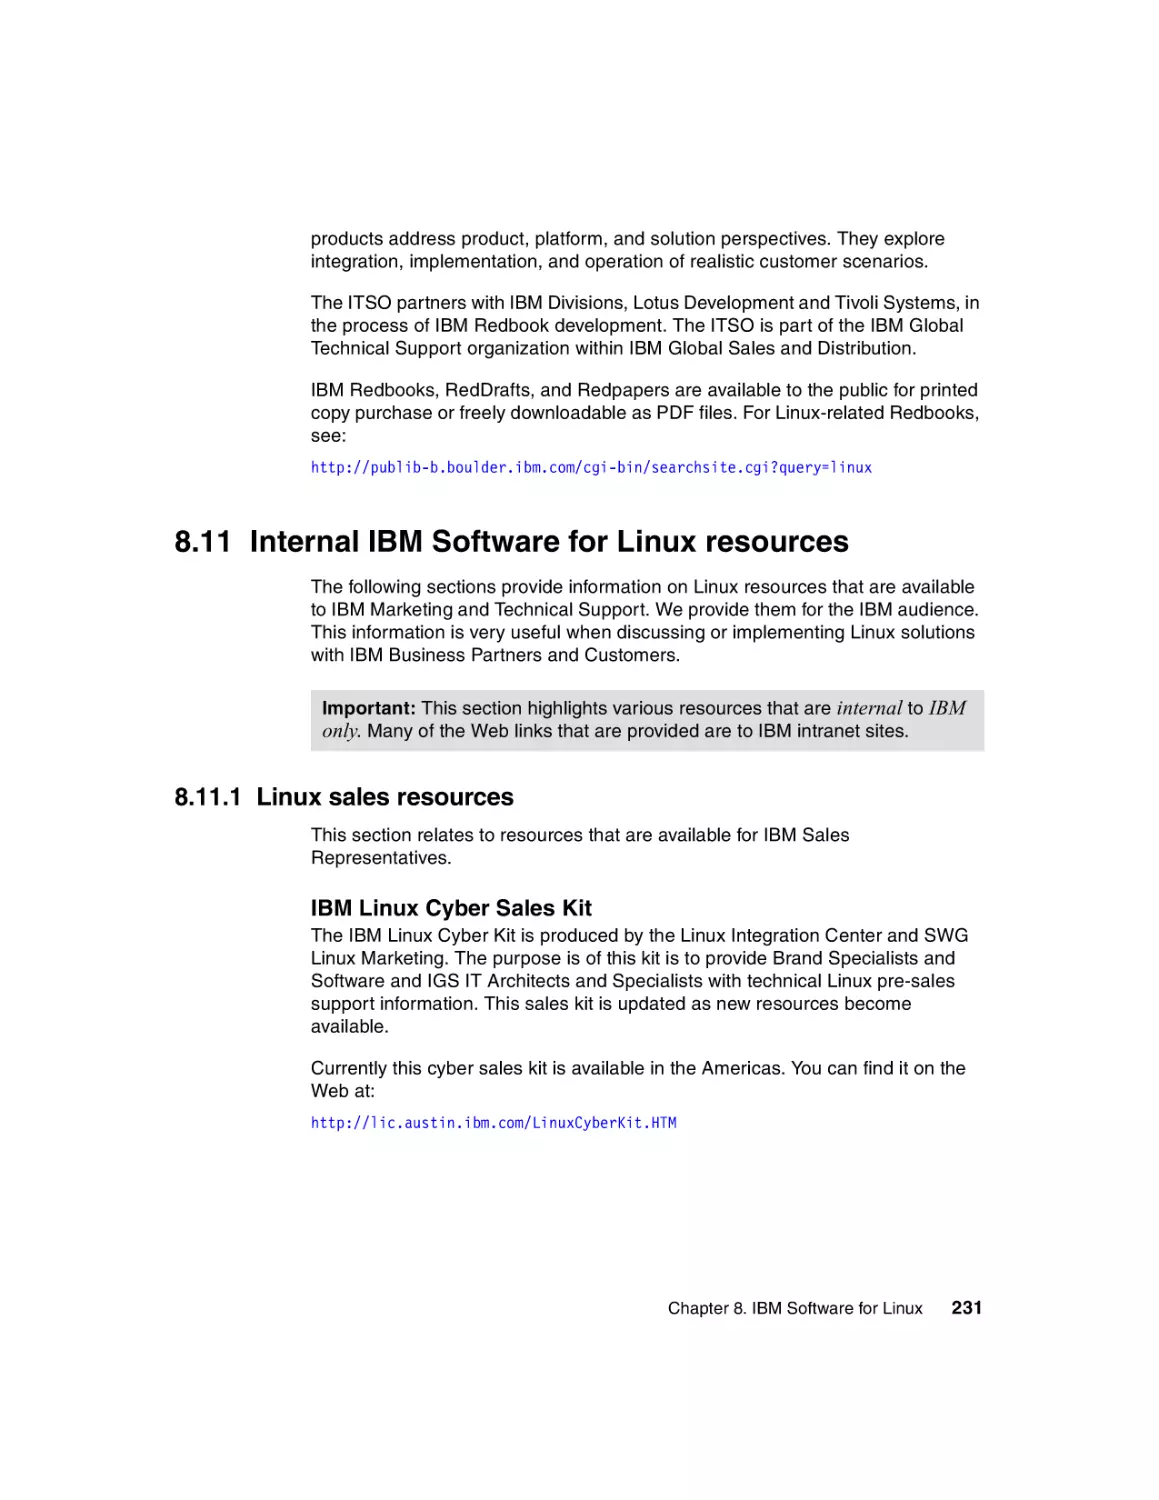 8.11 Internal IBM Software for Linux resources
8.11.1 Linux sales resources